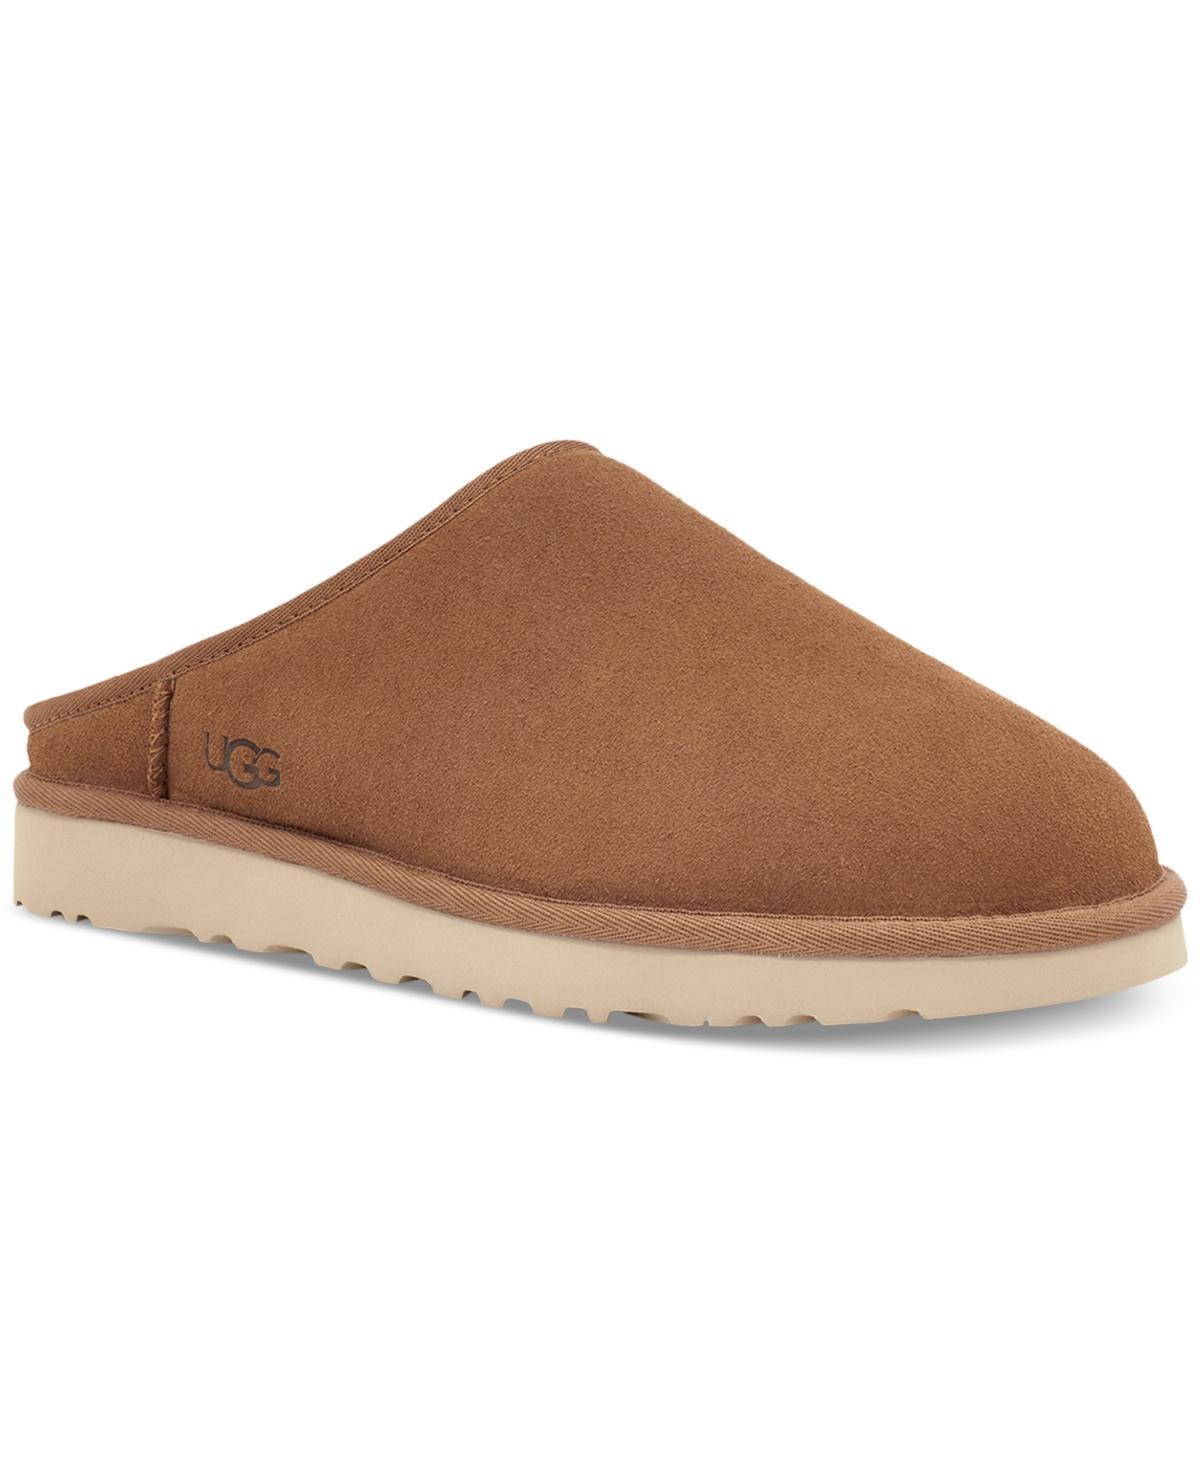 UGG Mens UGG Classic Slip On - Mens Shoes Product Image